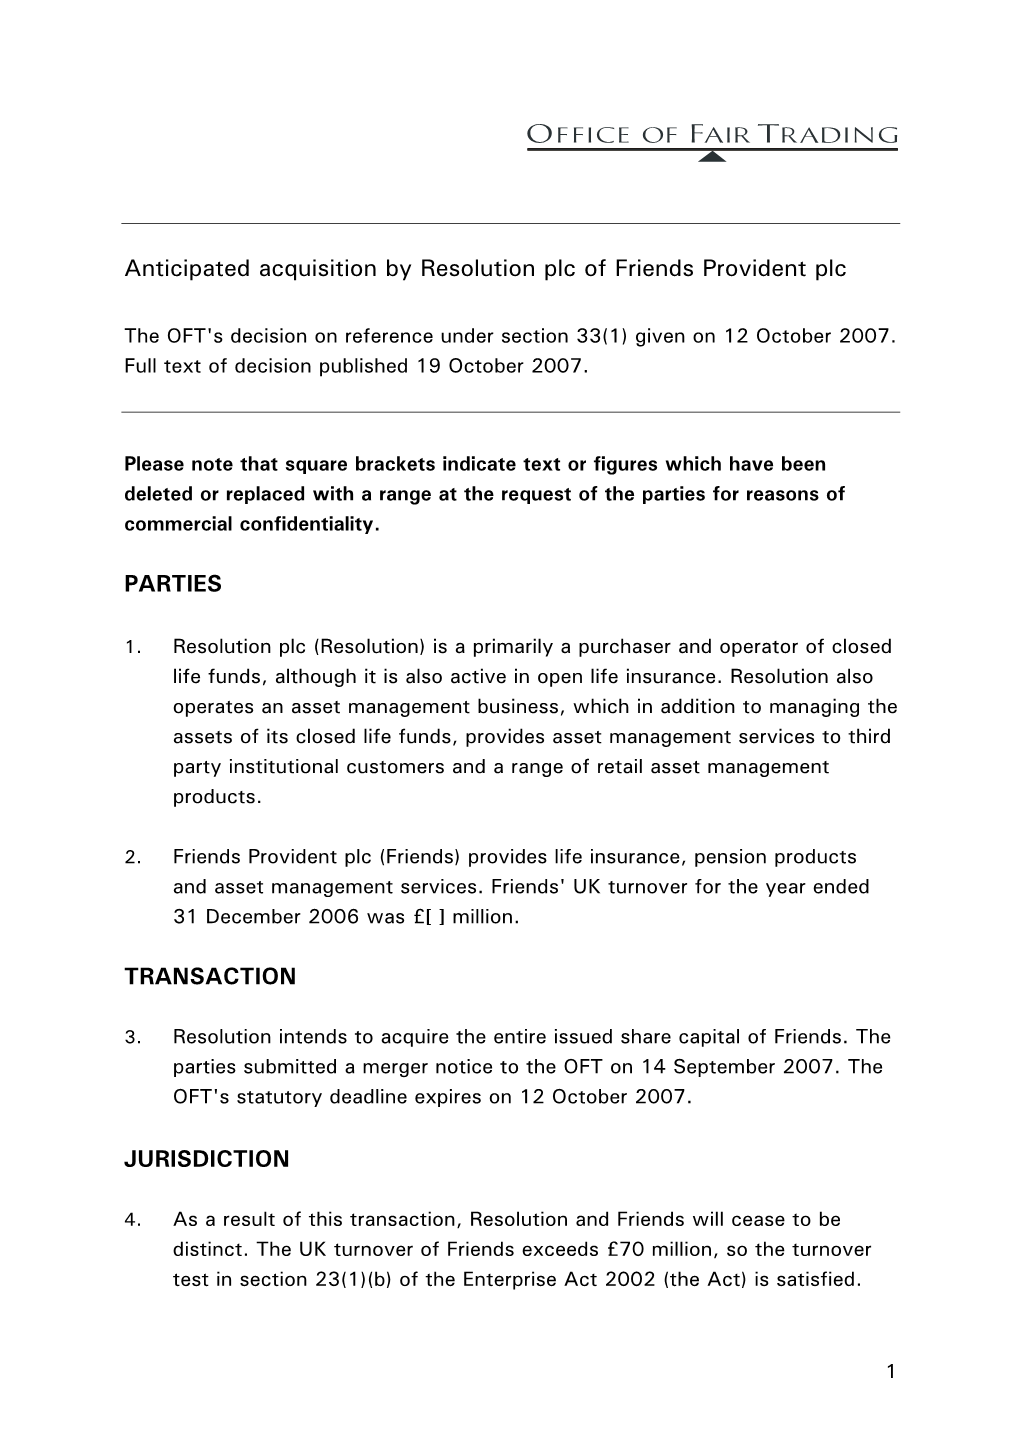 Anticipated Acquisition by Resolution Plc of Friends Provident Plc